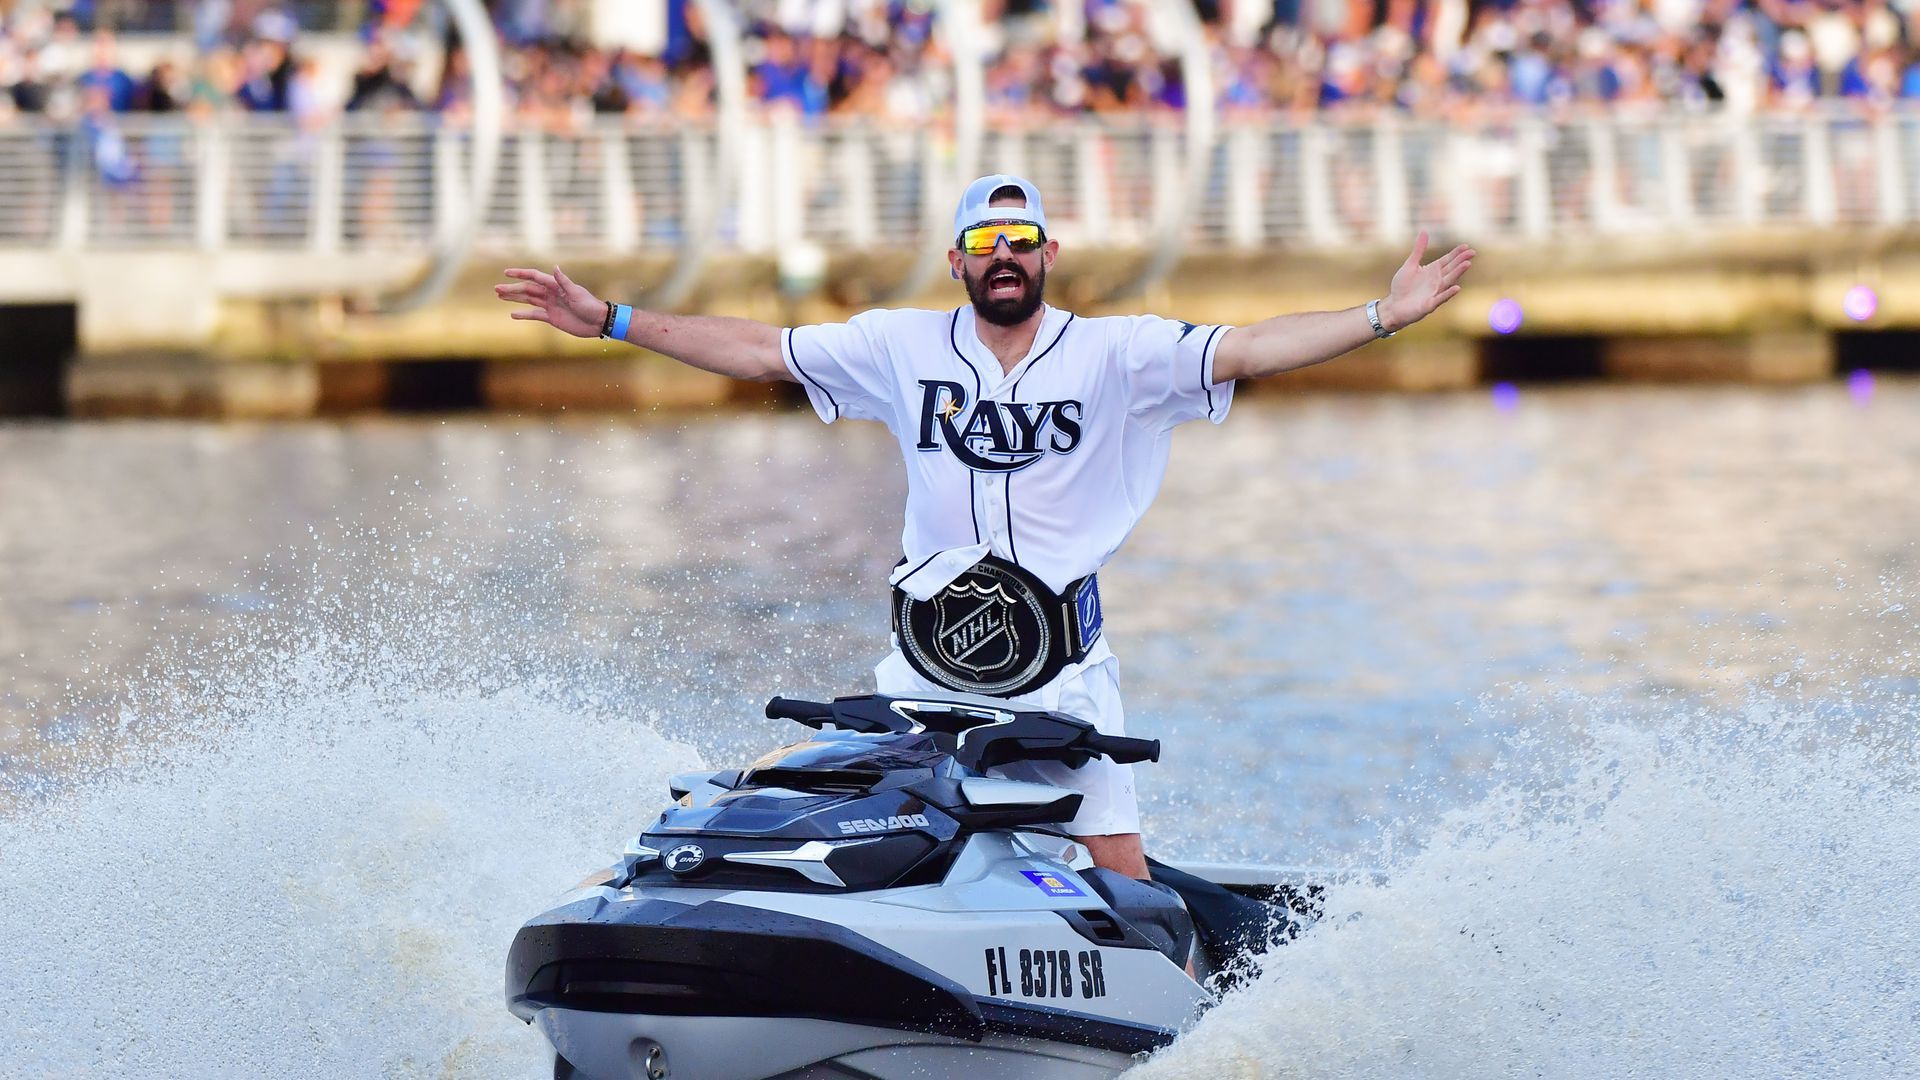 PHOTOS: Memorable moments from the Lightning victory boat parade